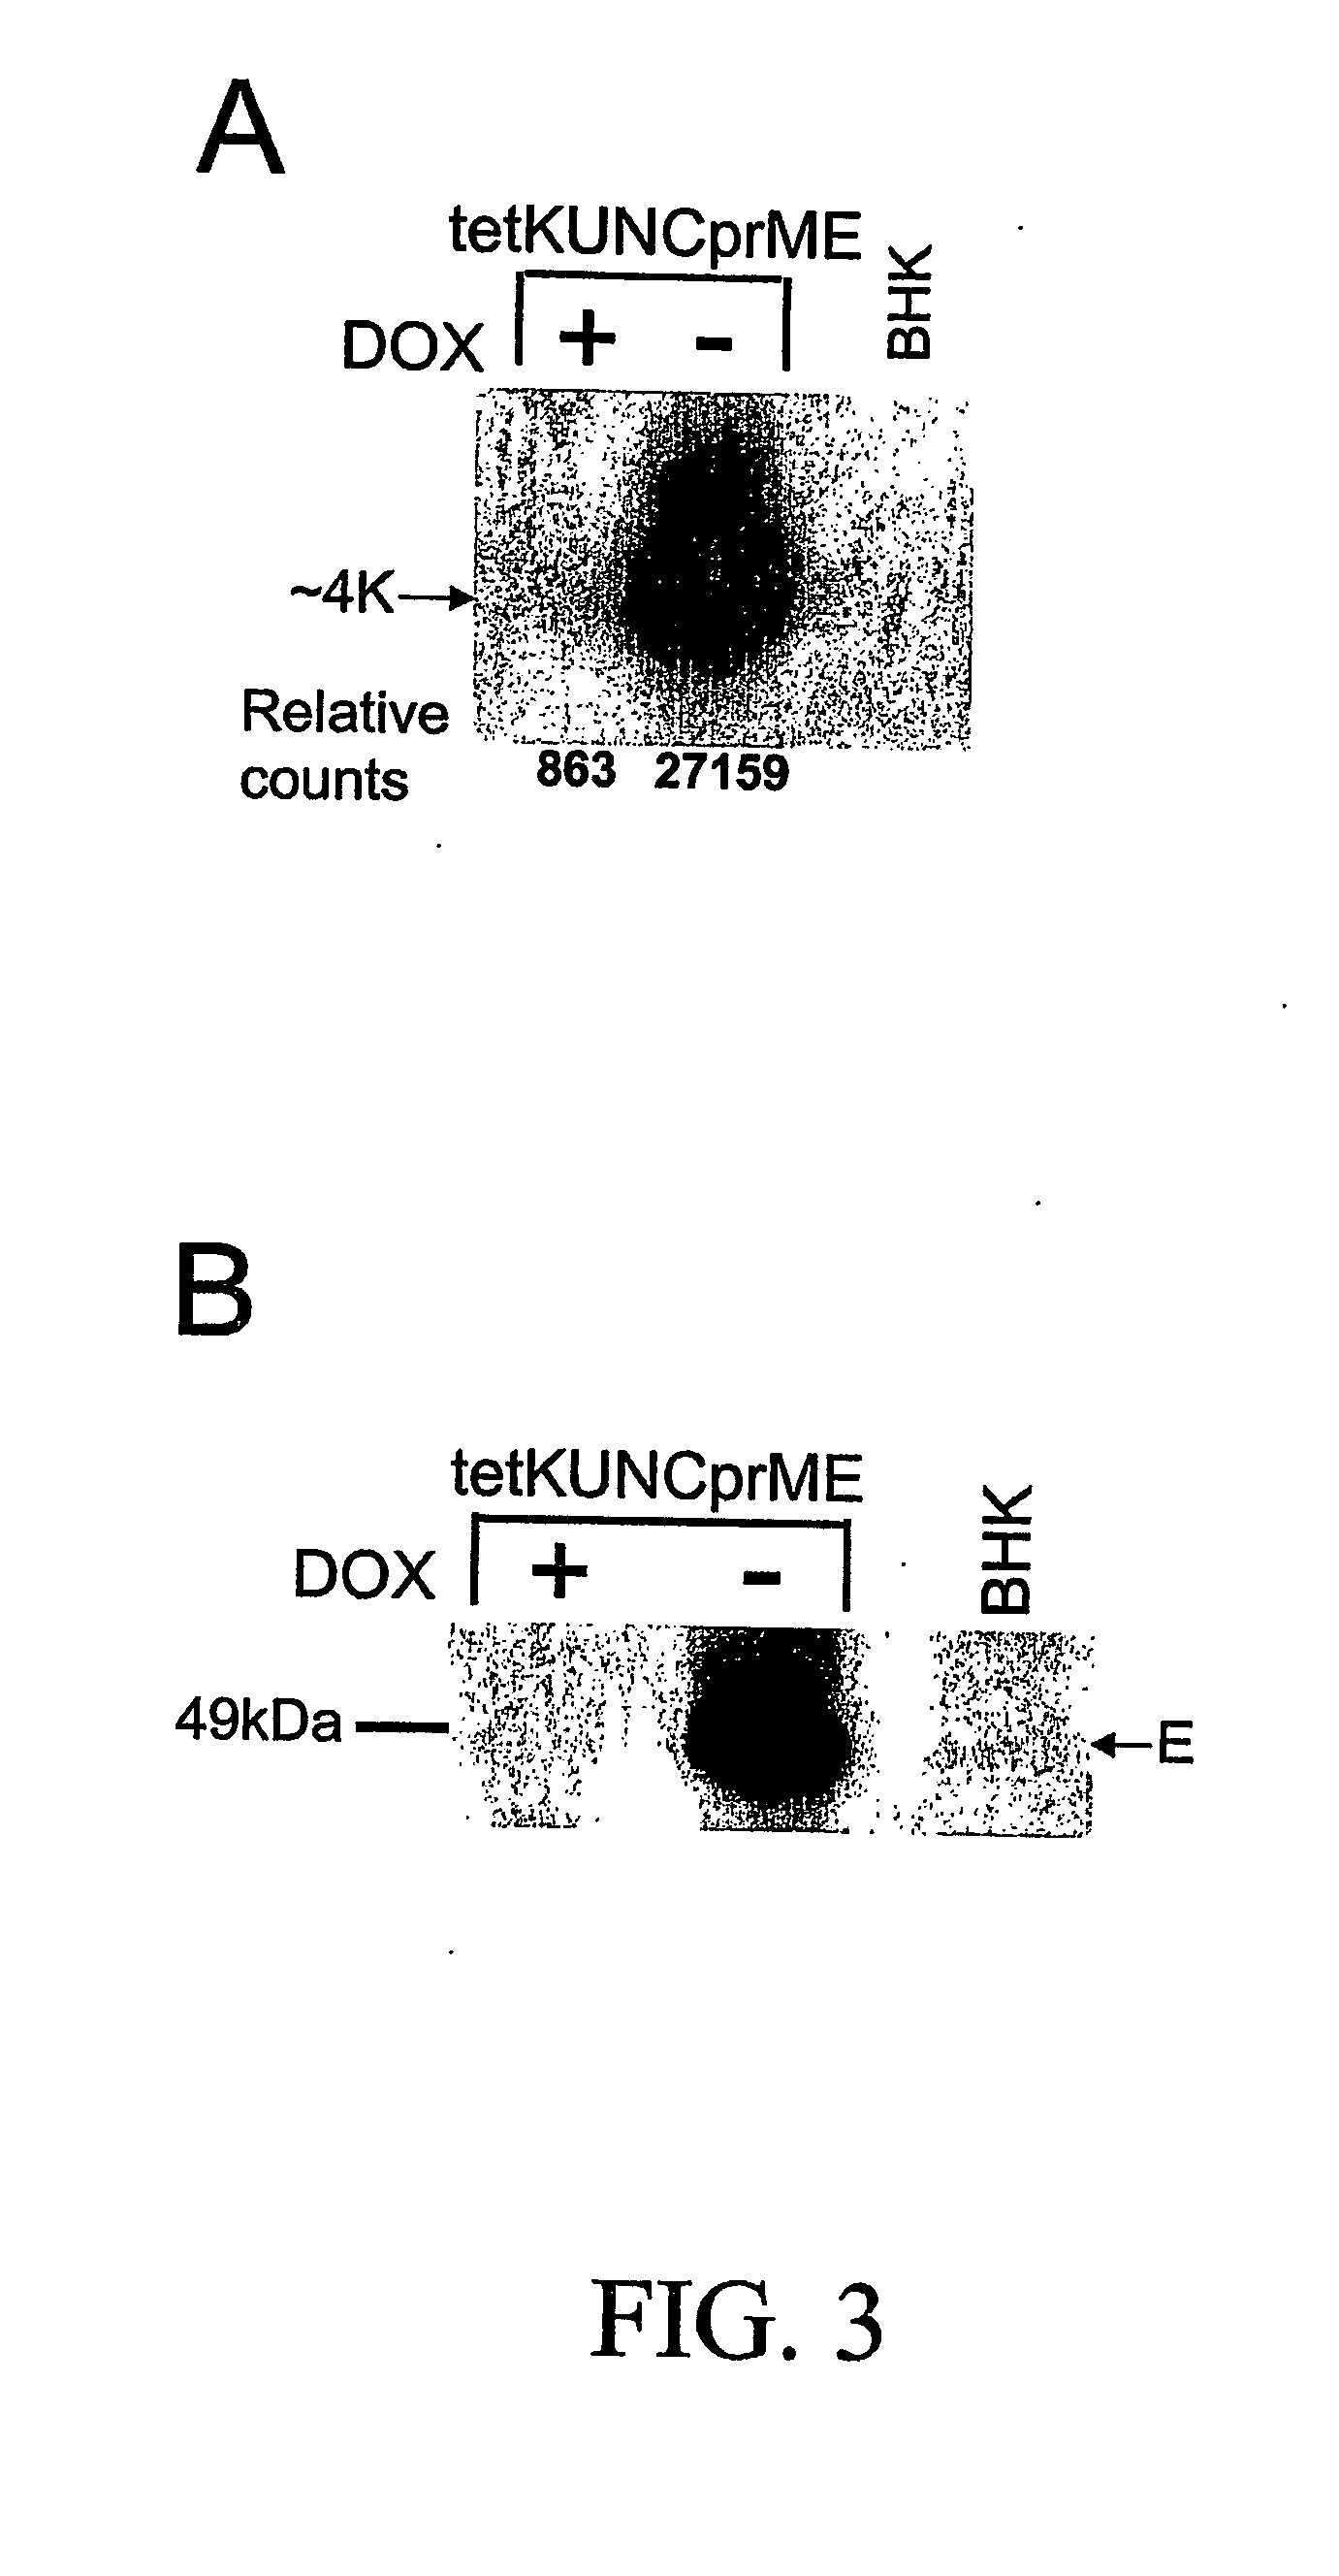 Flavivirus vaccine delivery system